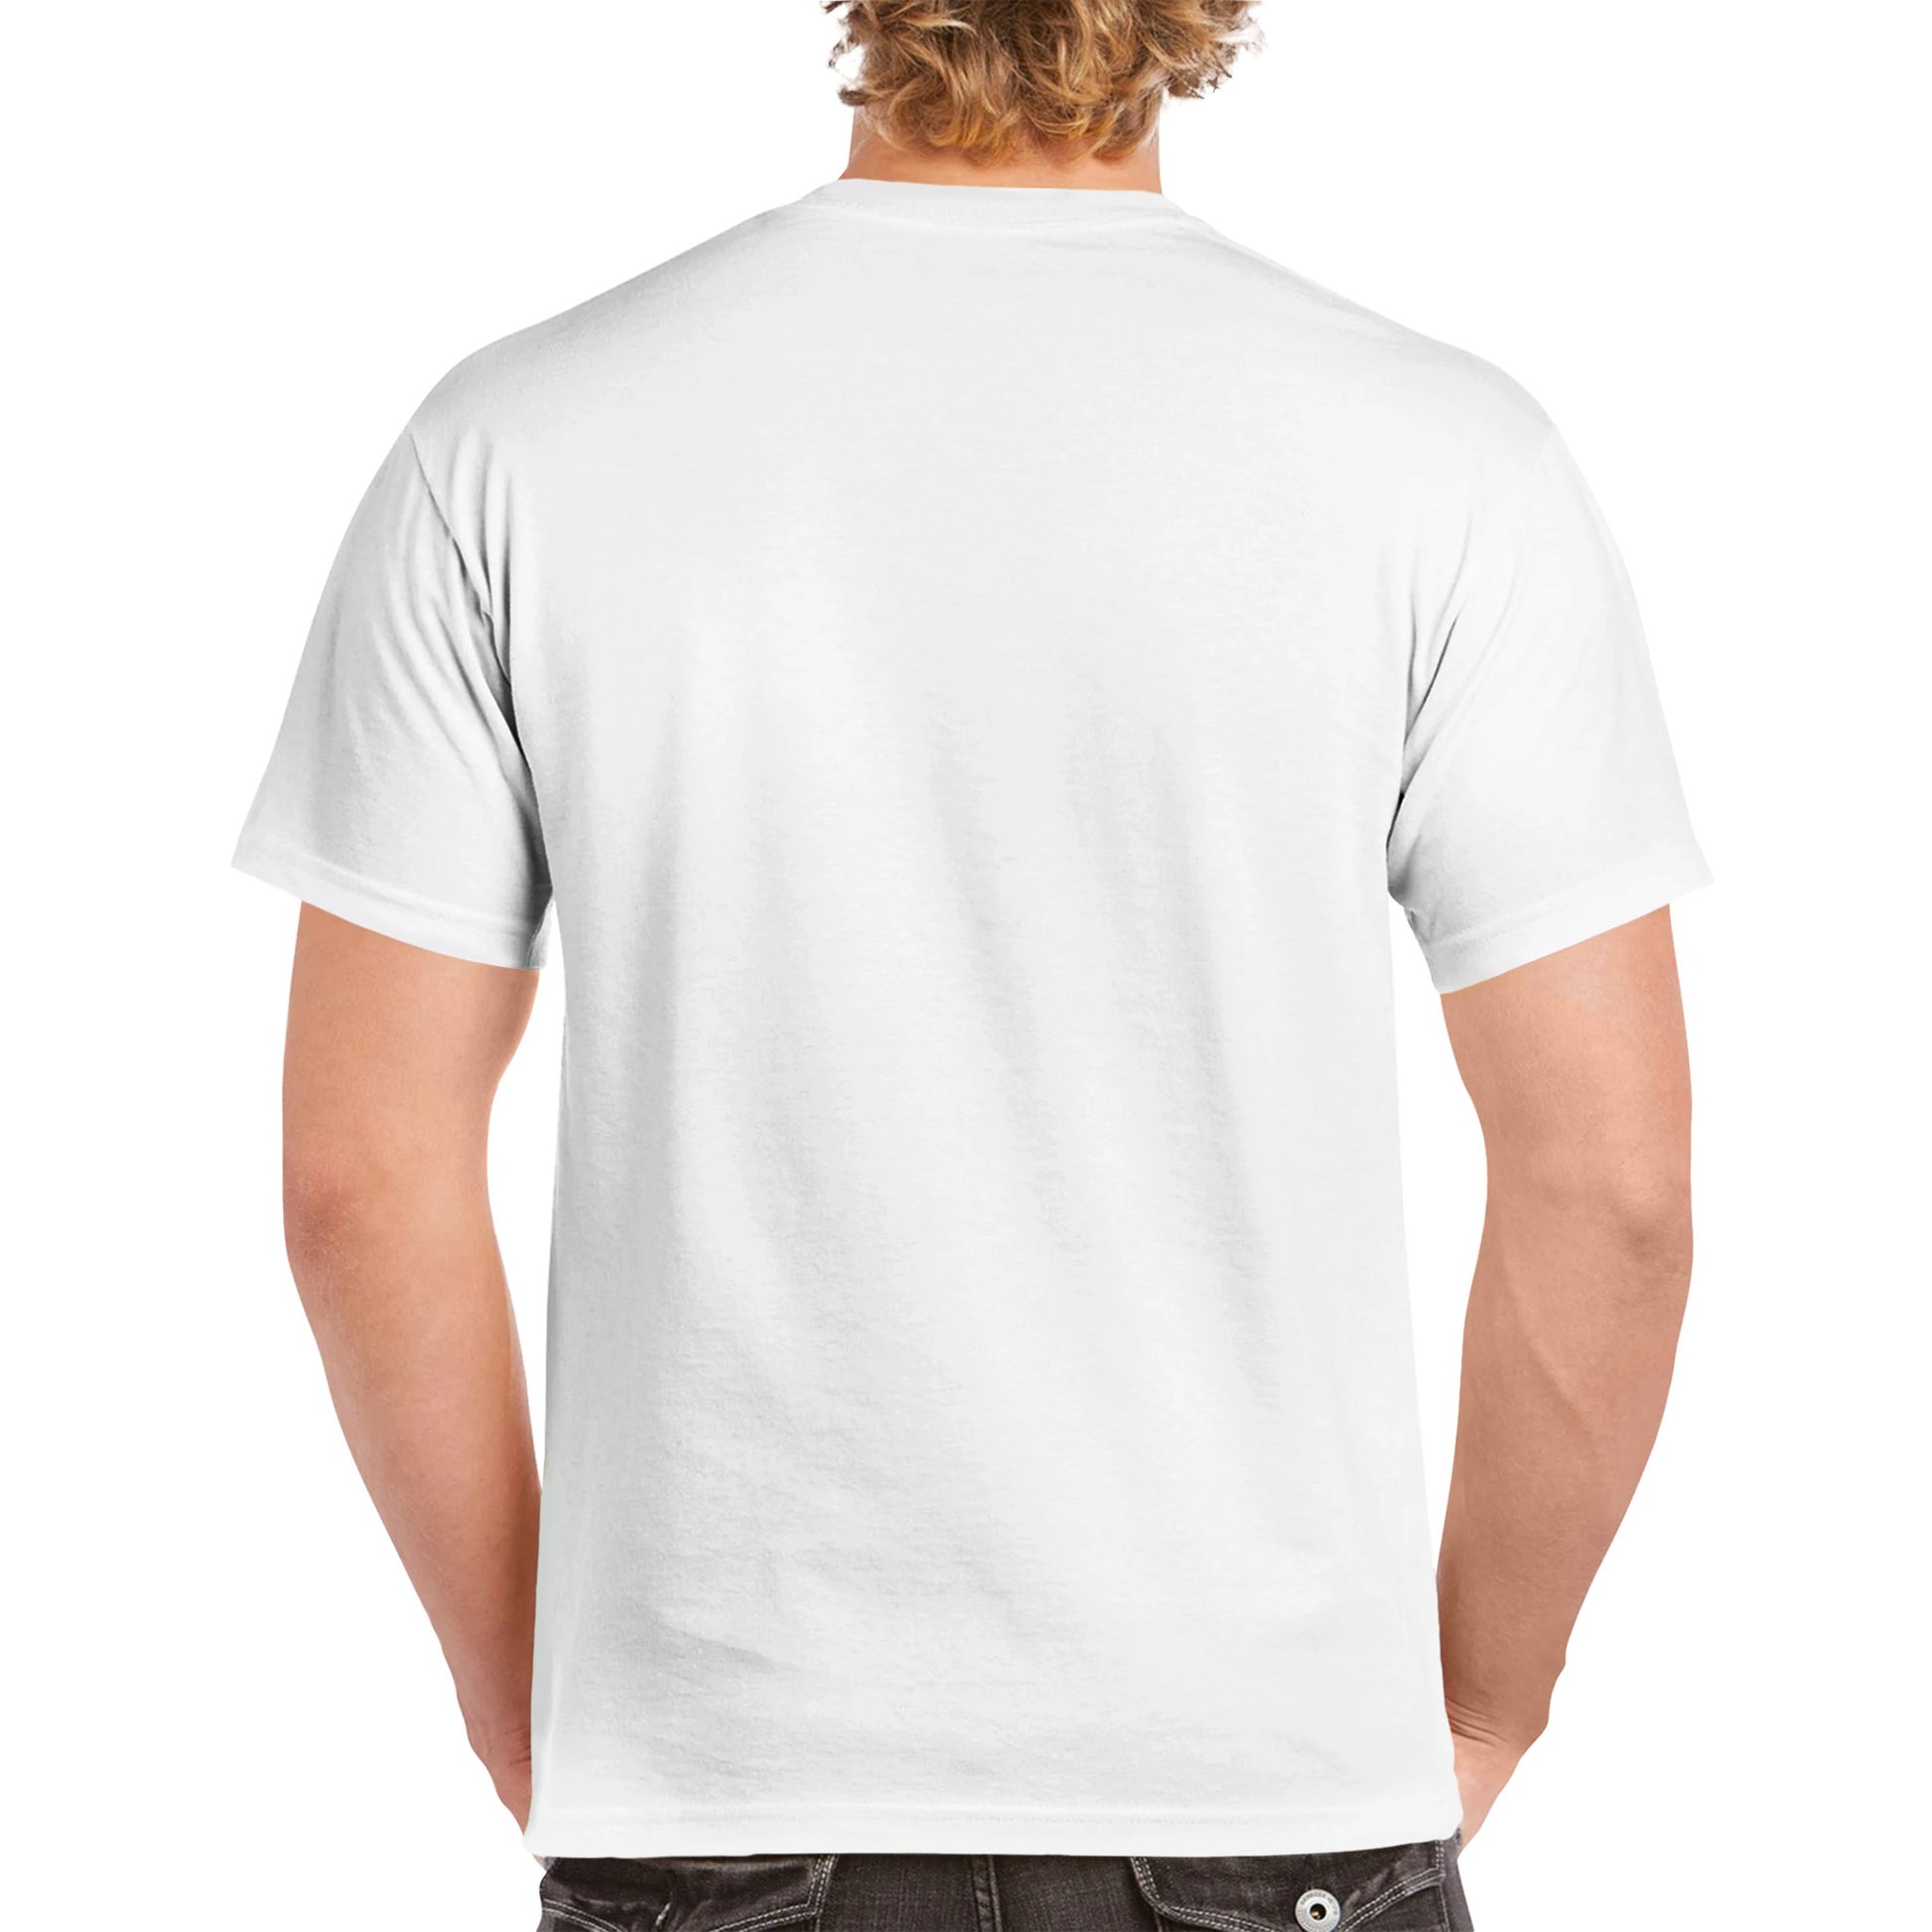 A white comfortable Unisex Crewneck heavyweight cotton t-shirt with funny saying I’d be a PickleBall SuperStar if it wasn’t for the Damn Net and Lines and Let’s Play Pickleball logo on the front from WhatYa Say Apparel worn by blonde-haired male rear view.